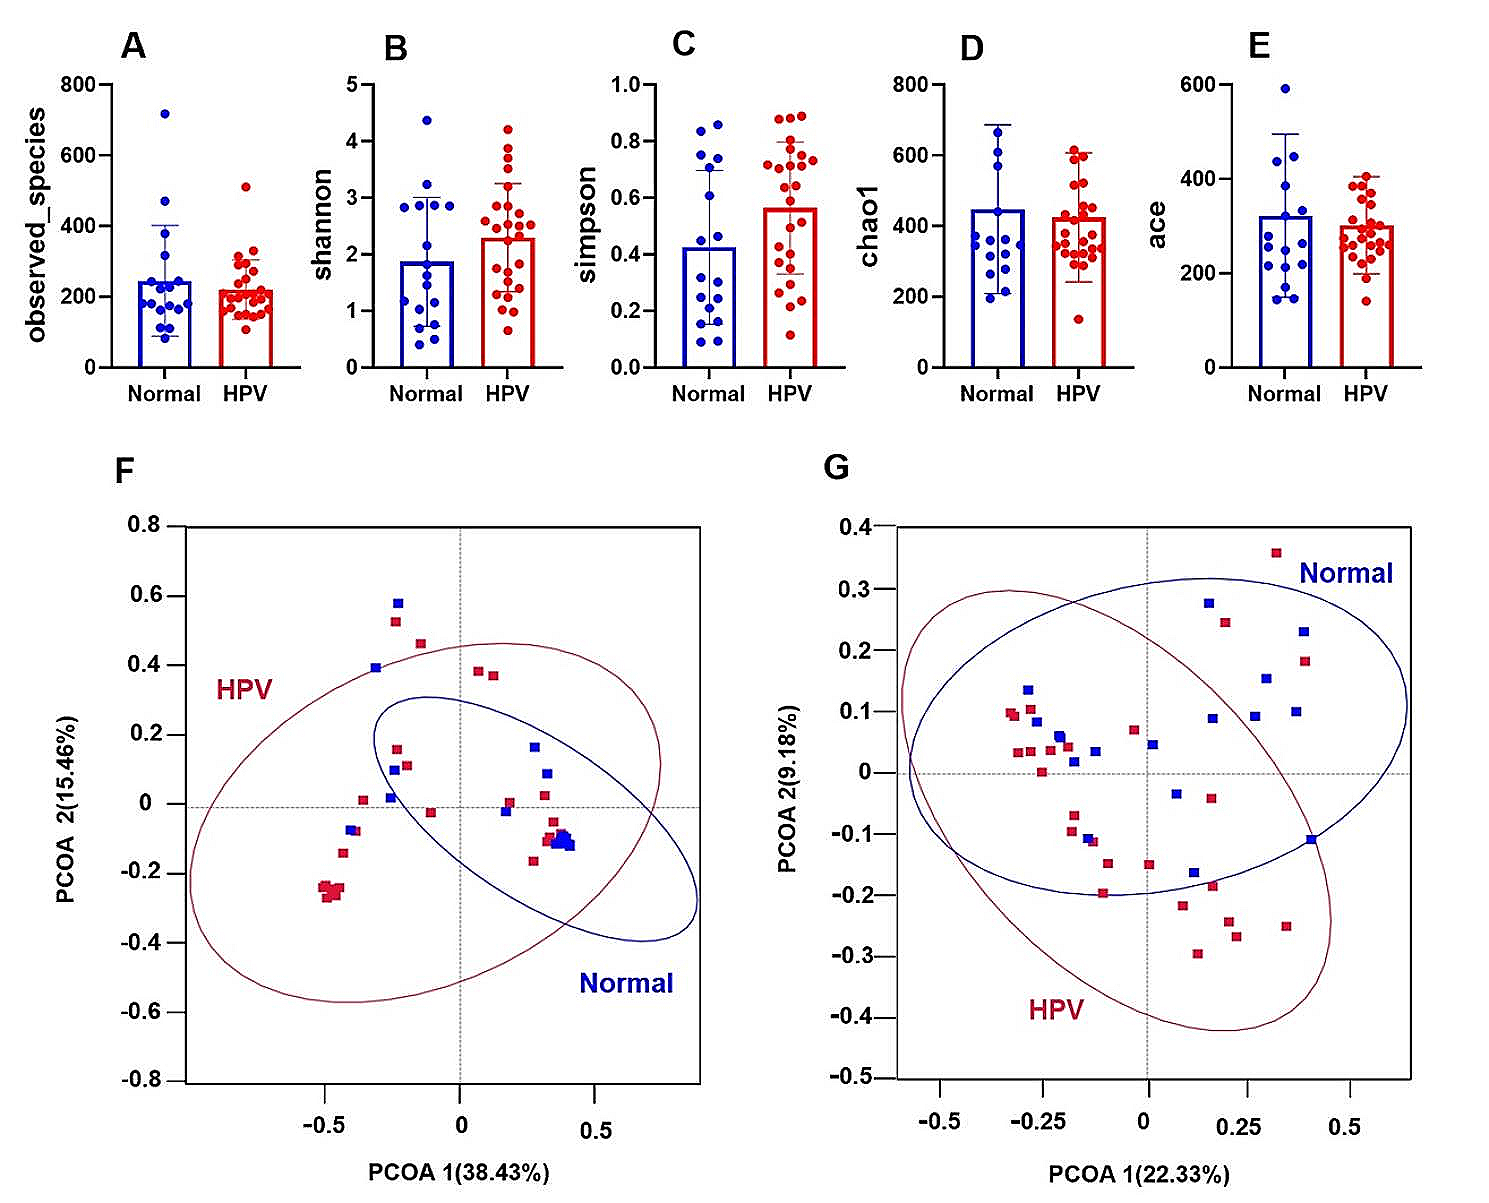 HPV-associated cervicovaginal microbiome and host metabolome characteristics